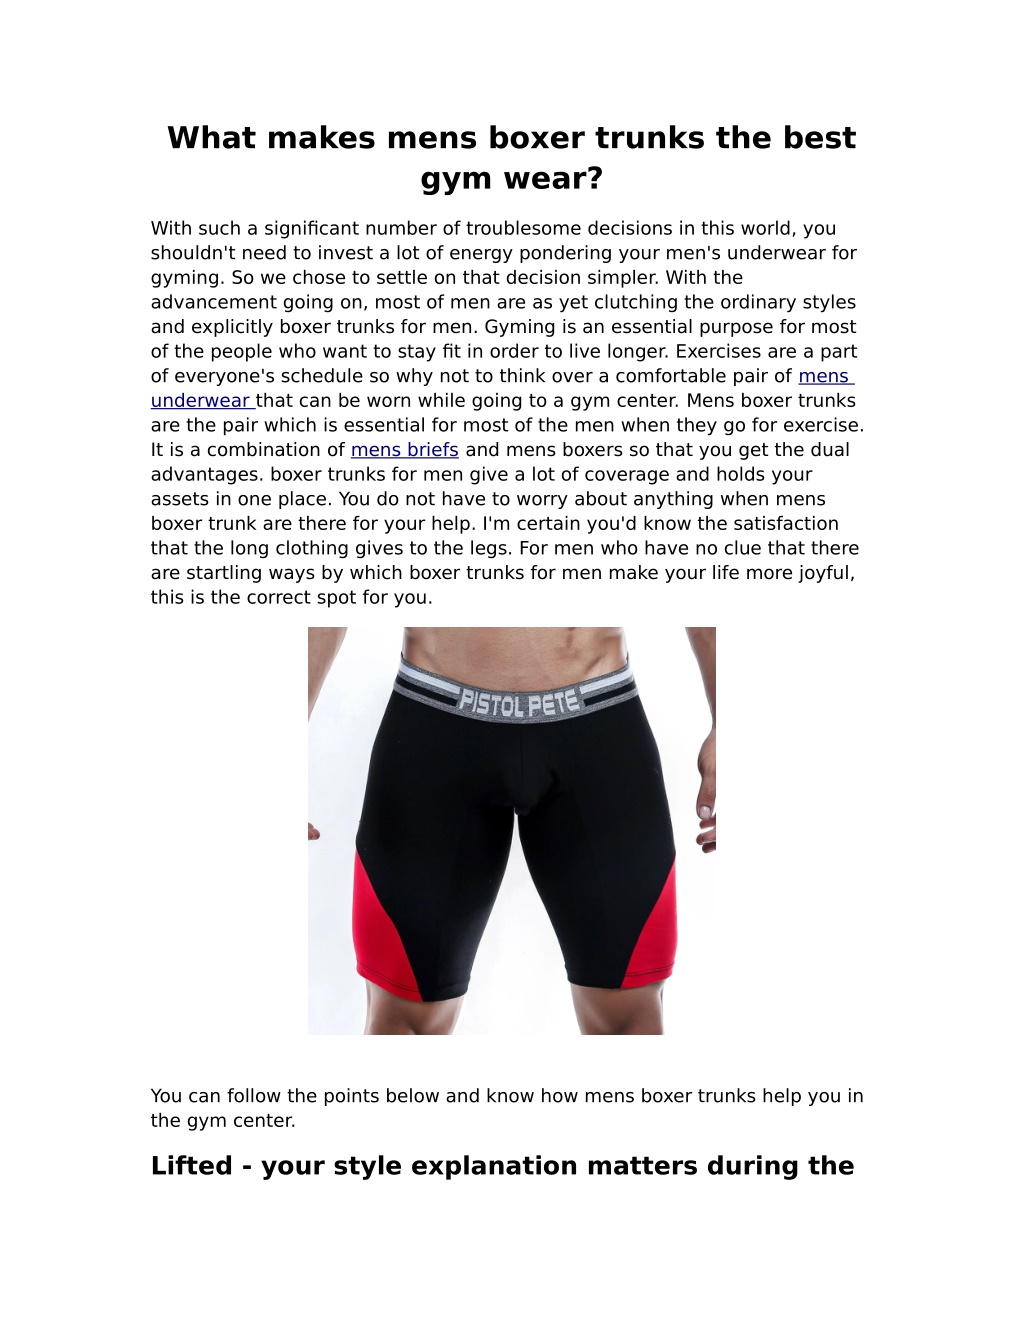 PPT - What makes mens boxer trunk the best gym wear? PowerPoint ...